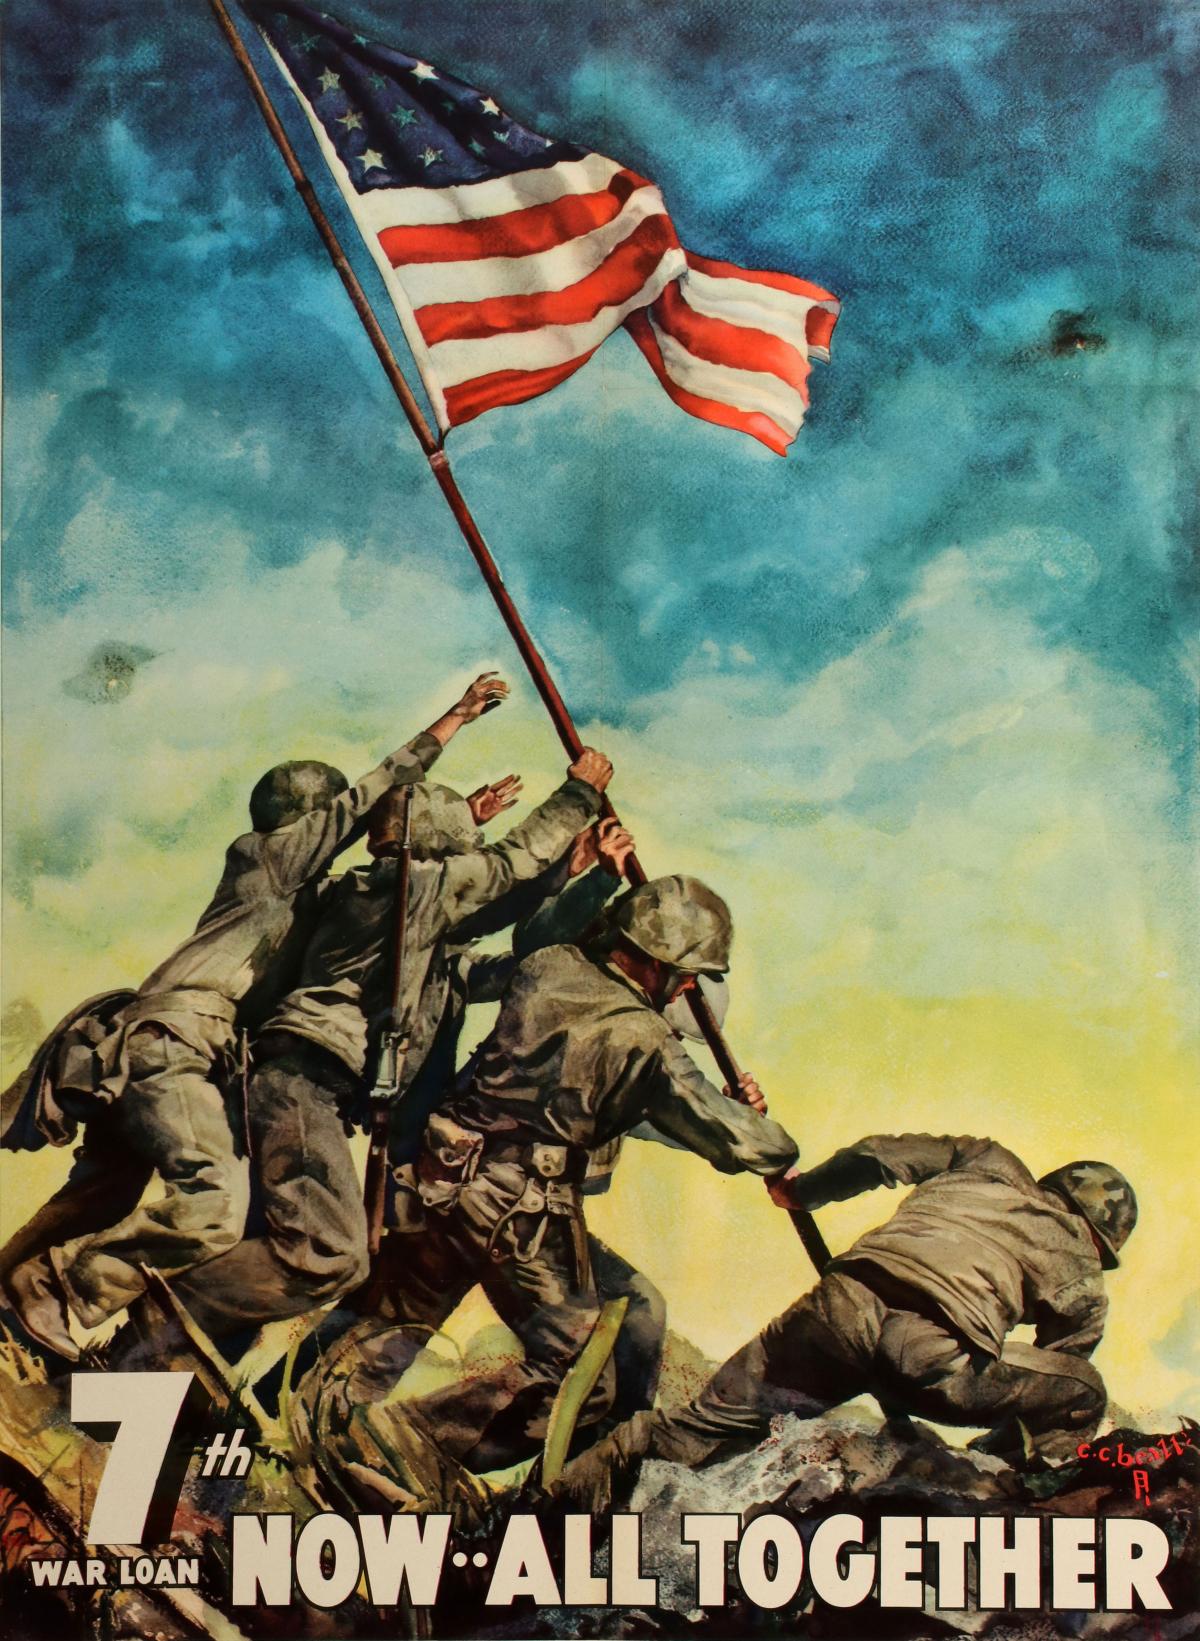 A 1945 POSTER OF MARINES AT IWO JIMA FOR 7TH WAR LOAN